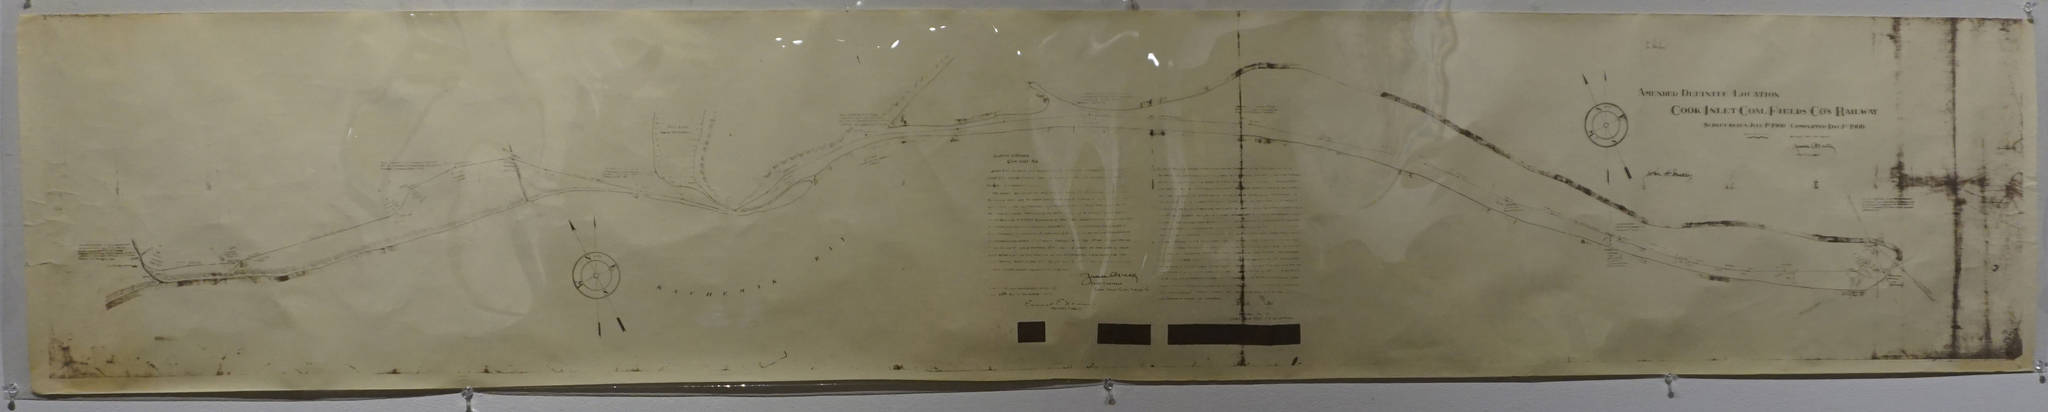 A 1900 map of the Cook Inlet Coal Fields railroad is one of the historic pieces included in cARTography exhibit, shown Tuesday, Aug. 22, 2017 at the Pratt Museum, Homer, Alaska. (Photo by Michael Armstrong, Homer News)